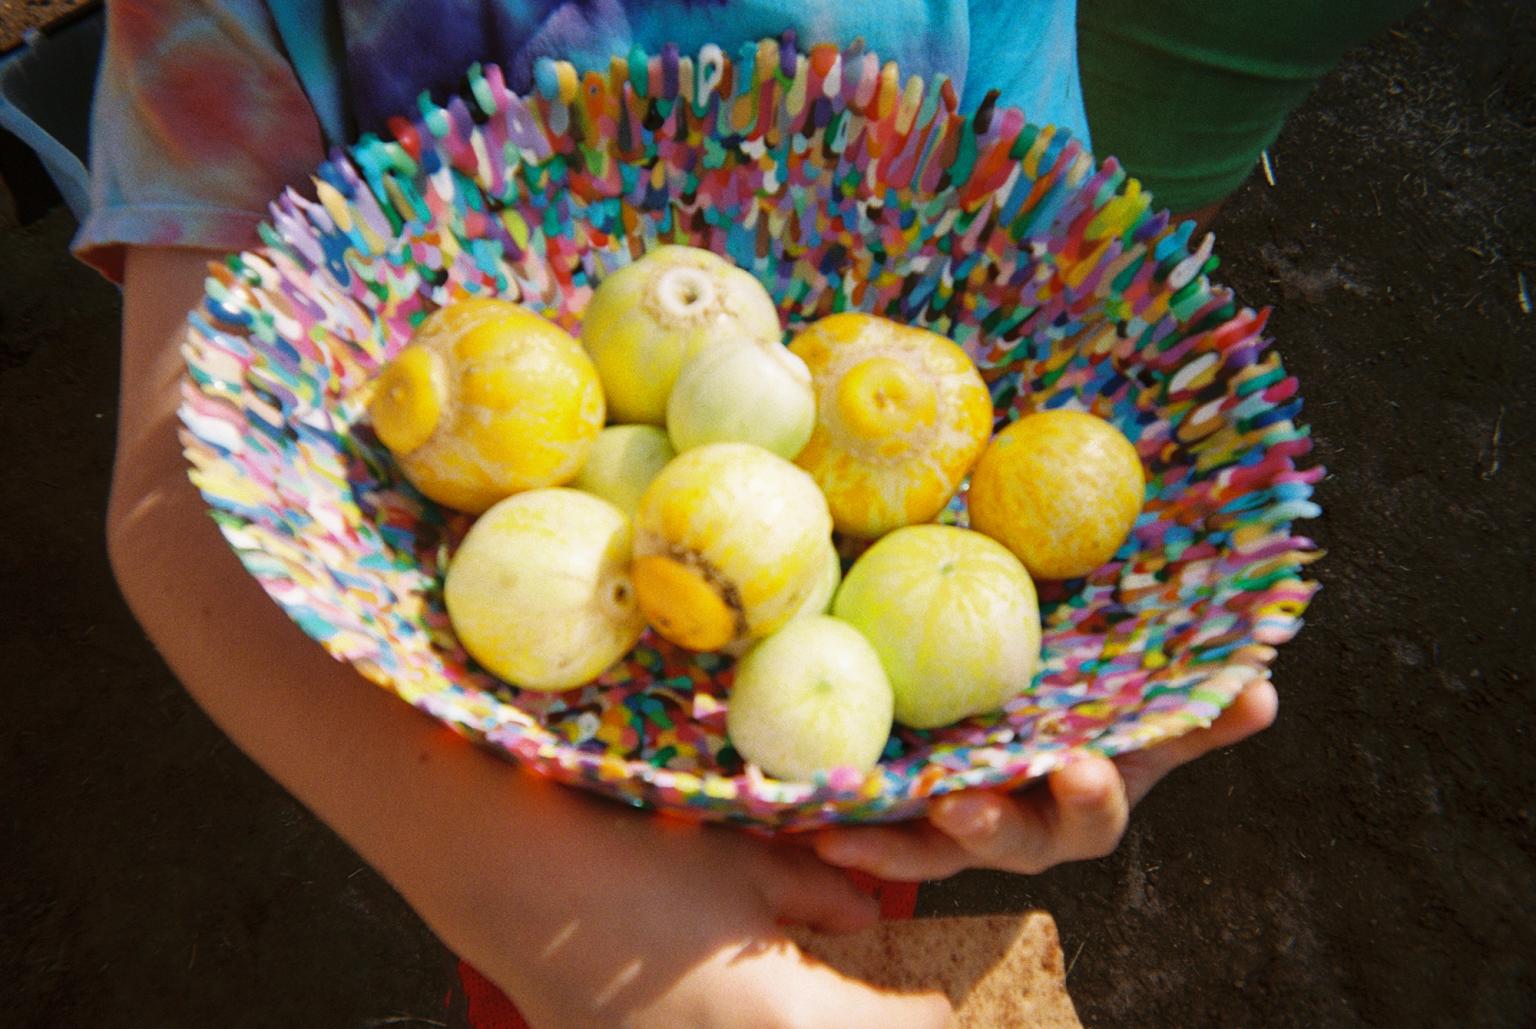 slightly grainy close up image of yellow lemon cucumbers in a rainbow colorful bowl, held in a child's arms